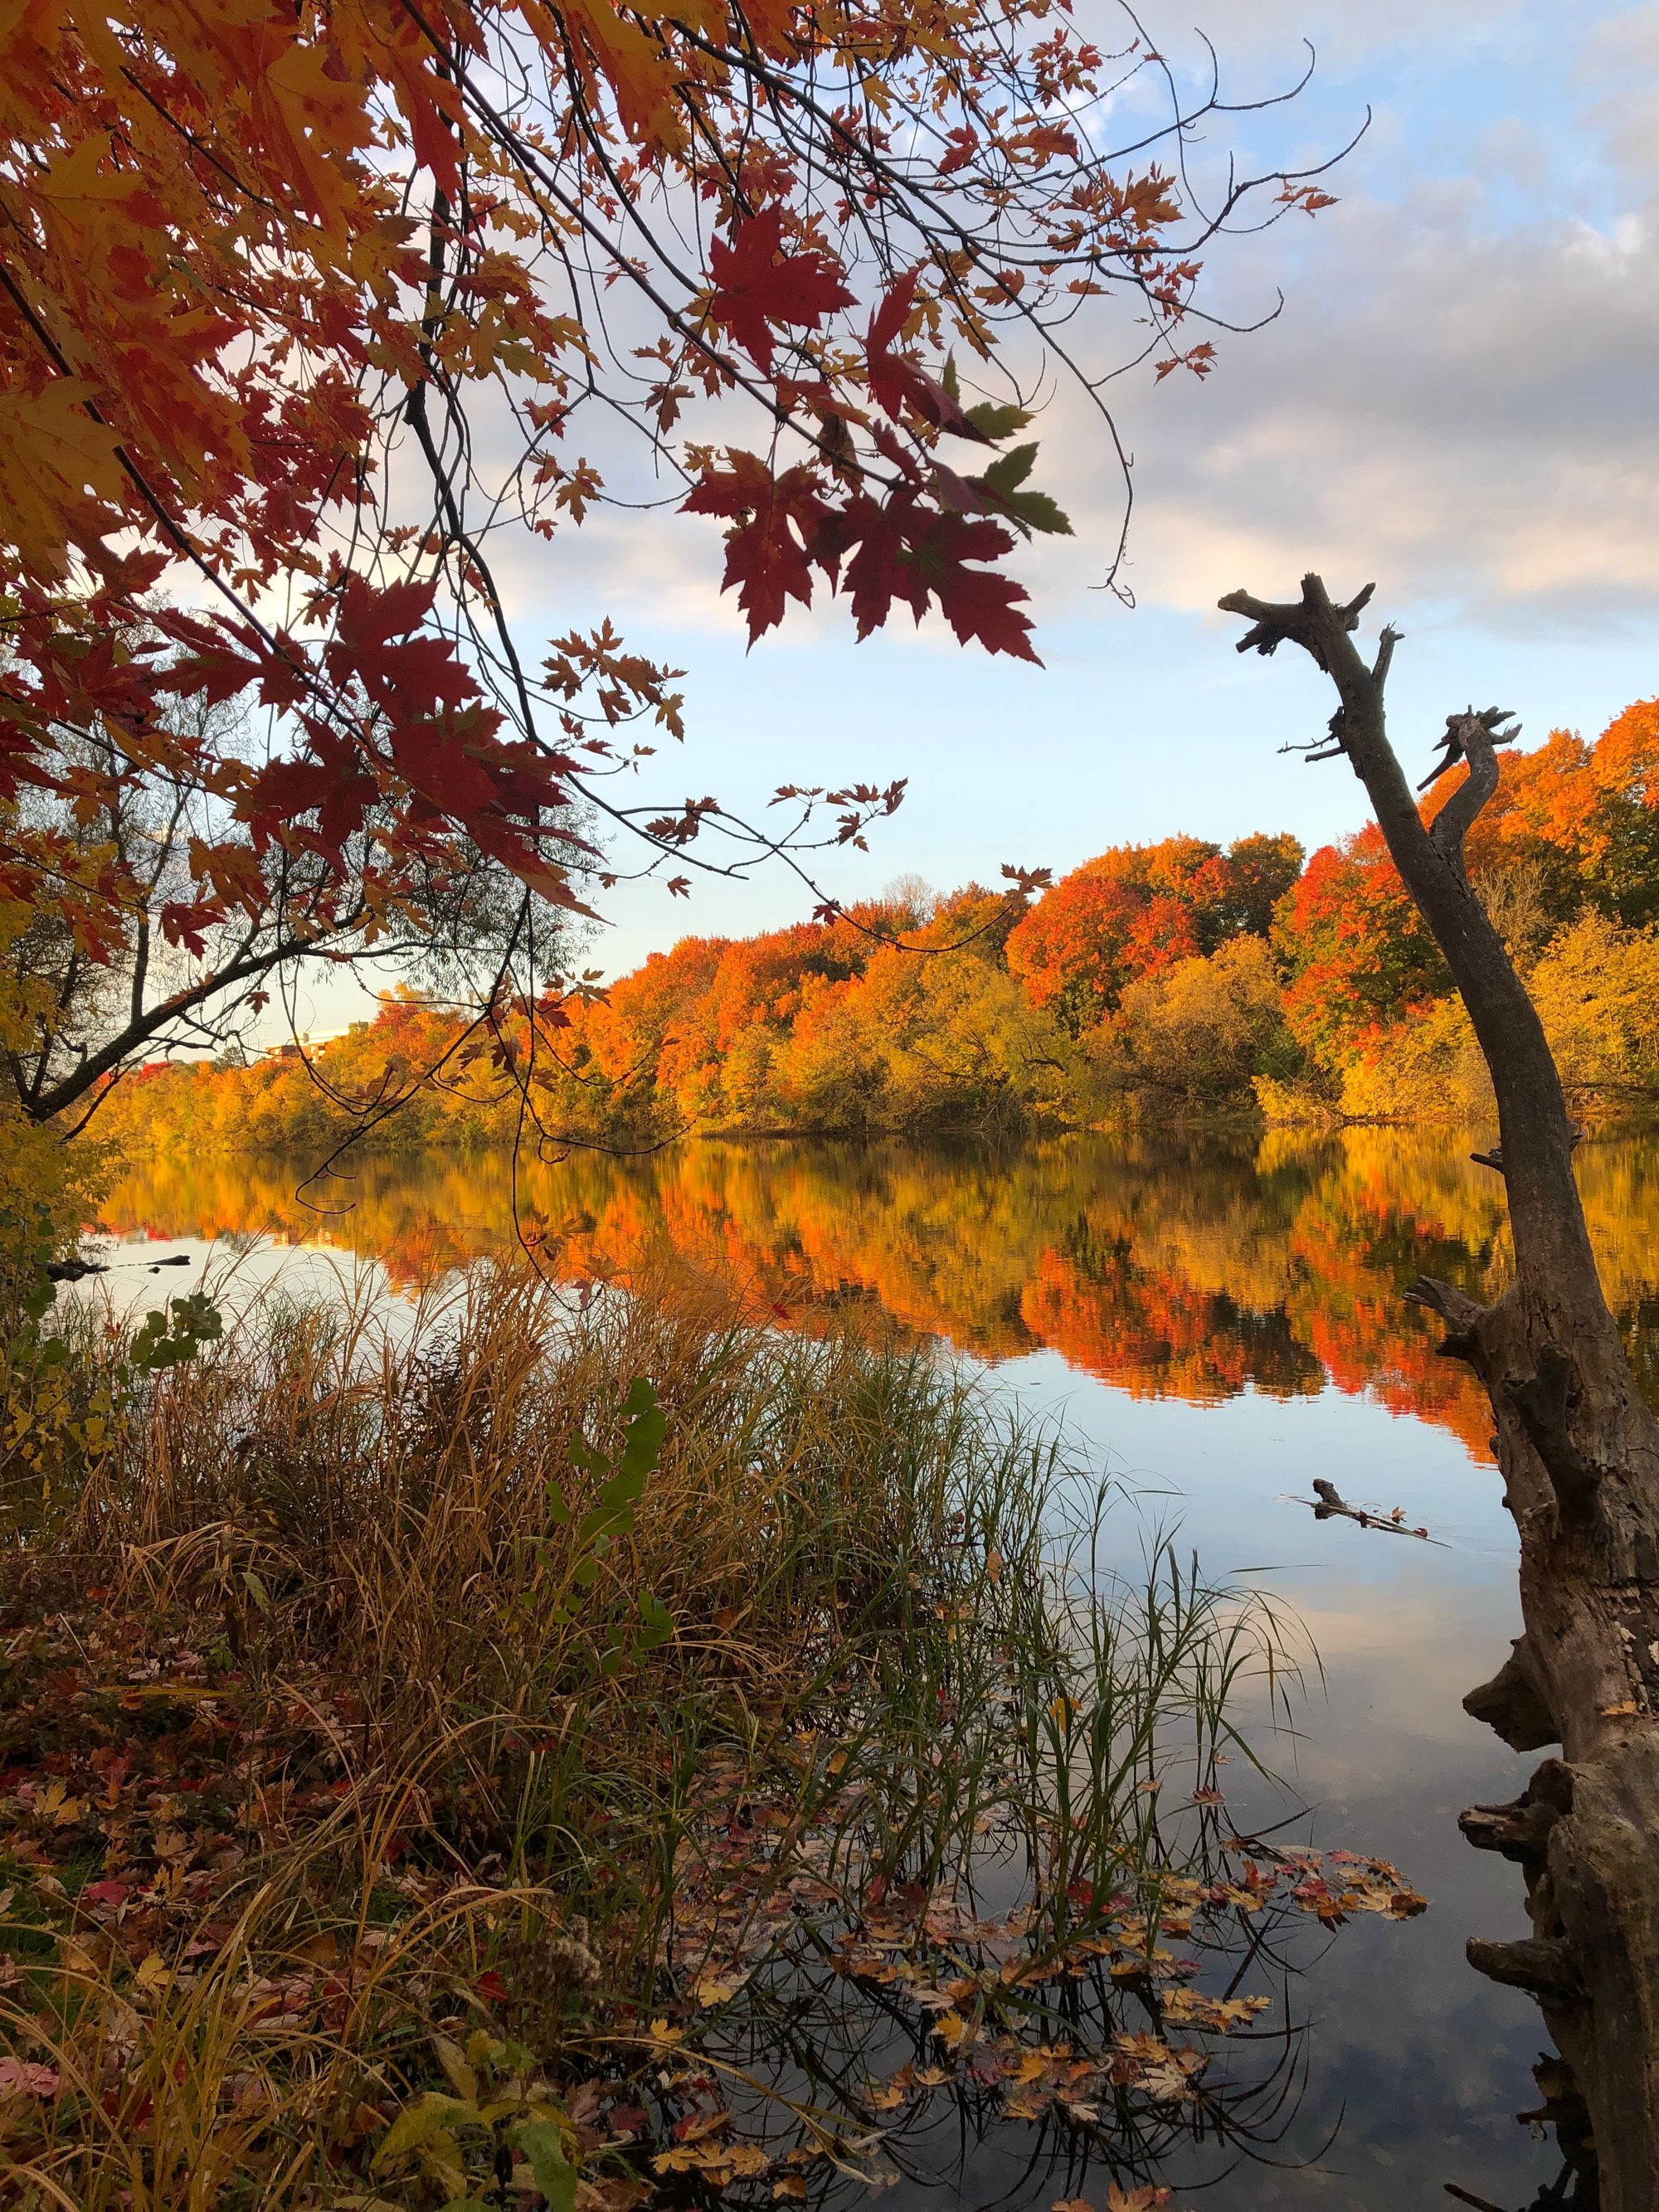 View of a river reflecting the colourful trees bordering it in the distance, framed in the foreground by a spray of red and yellow maples at top left, yellow and green grasses at bottom left, and a smooth dead branch rising up from bottom right. 